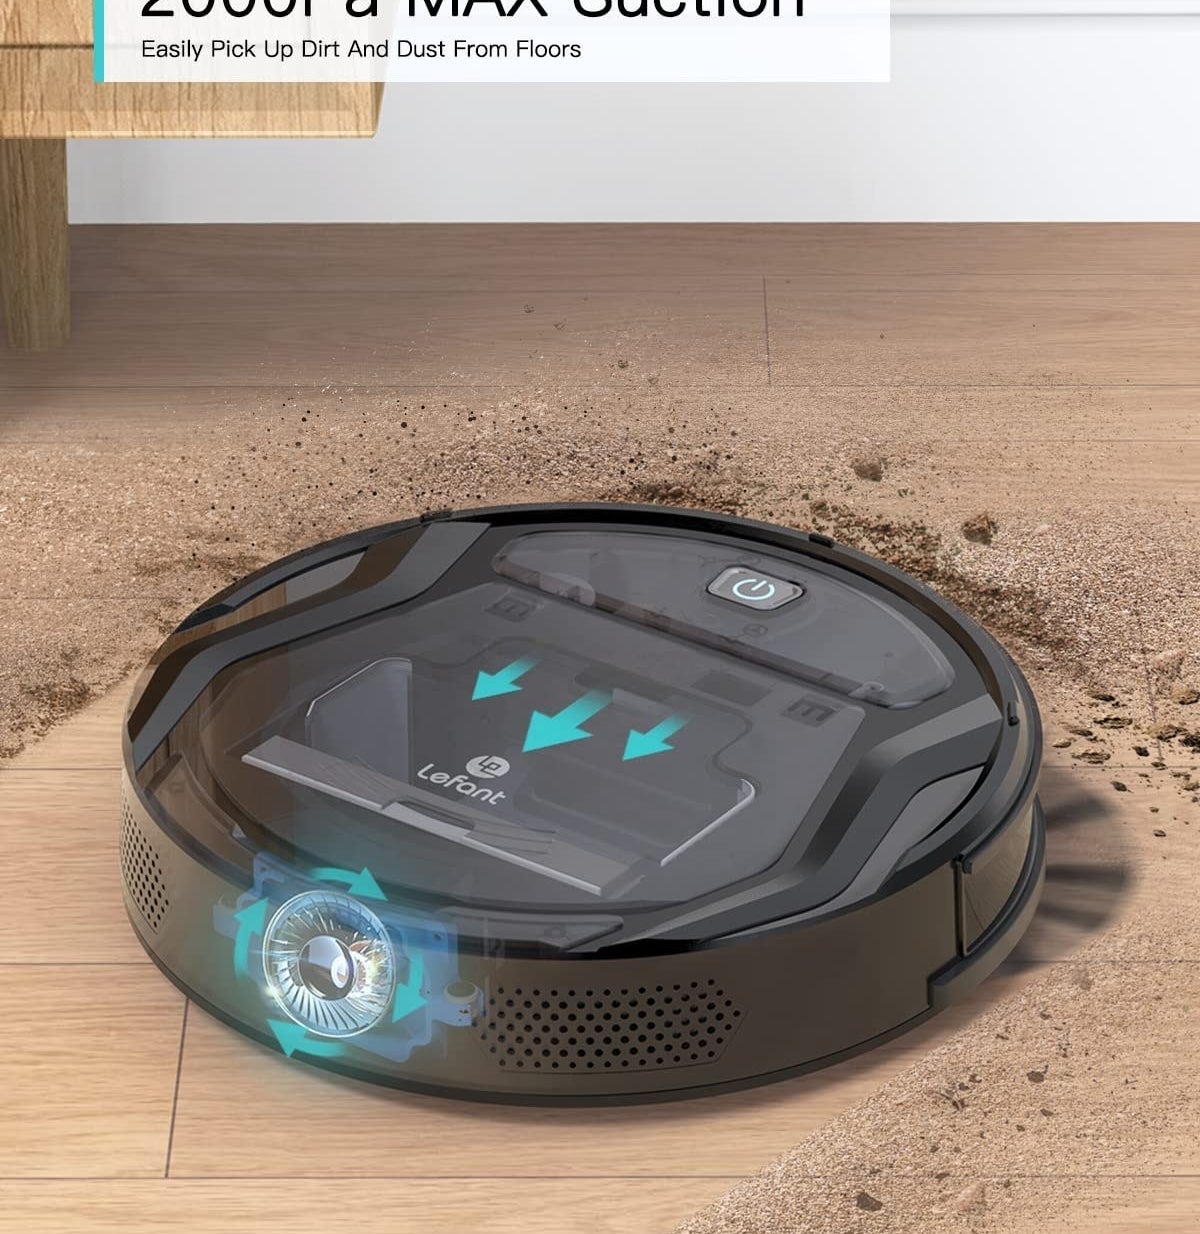 the robot mop cleaning up dirt around it